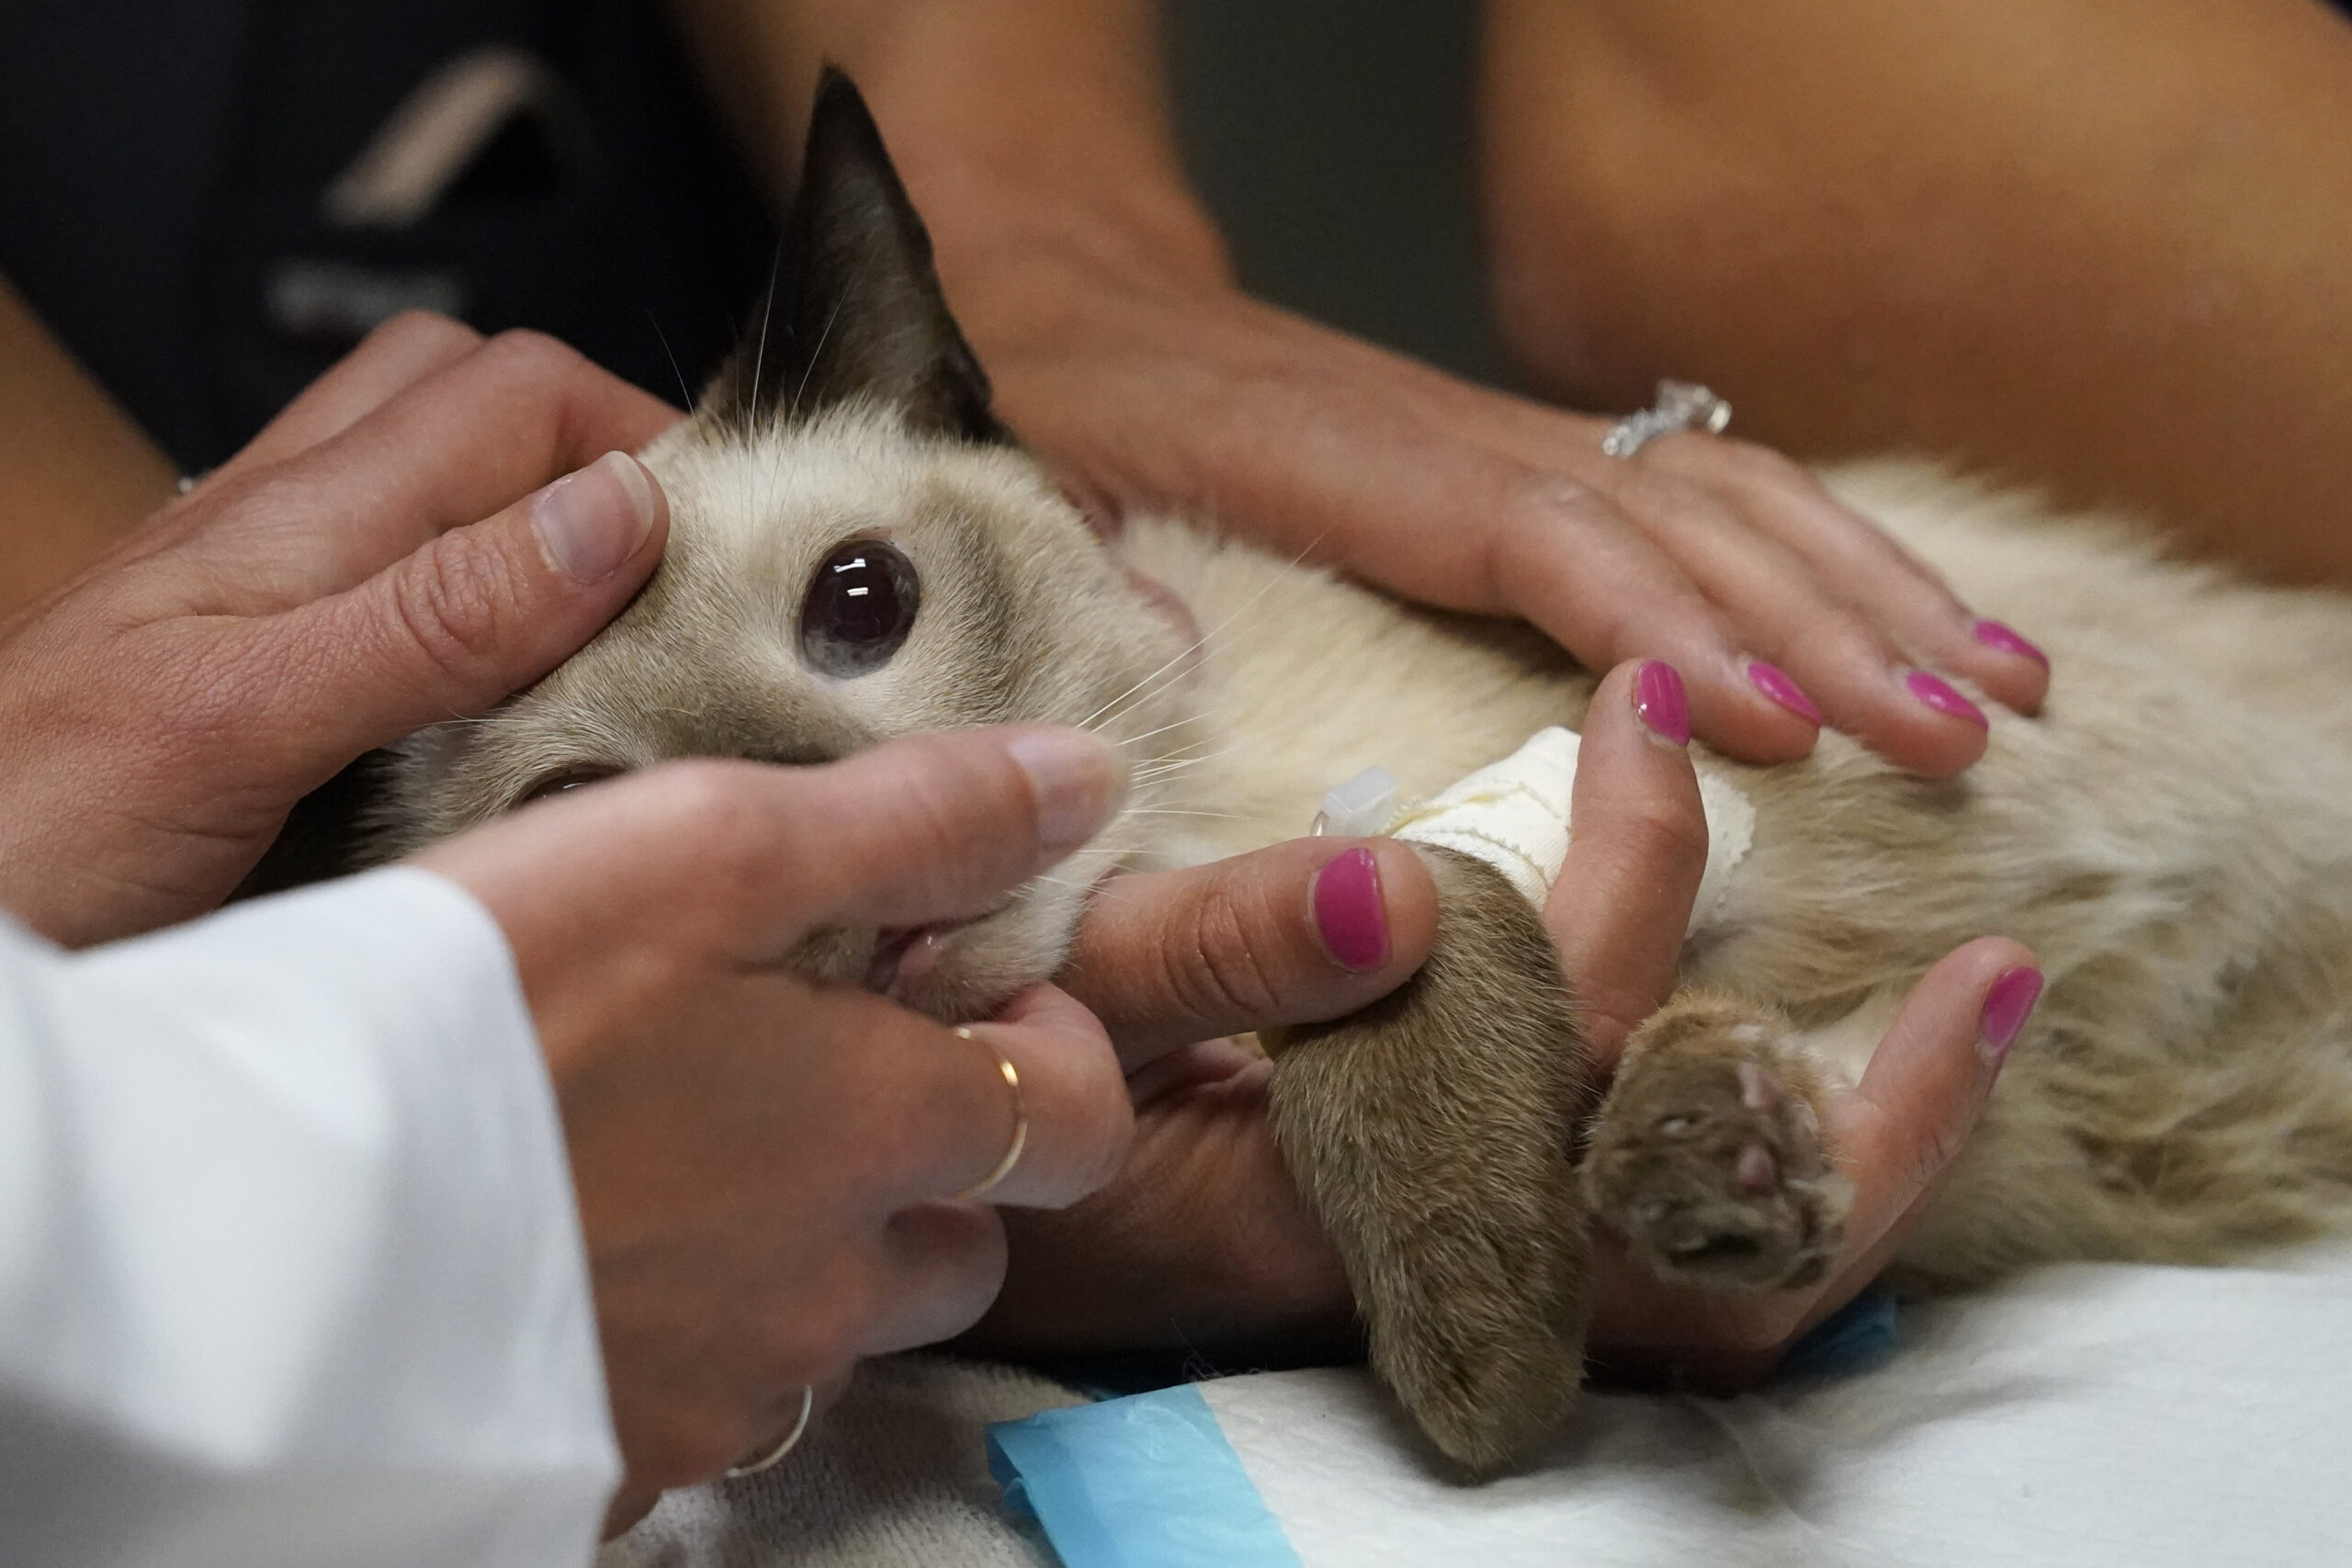 Veterinary personnel keep a cat named Miller calm as he has blood drawn